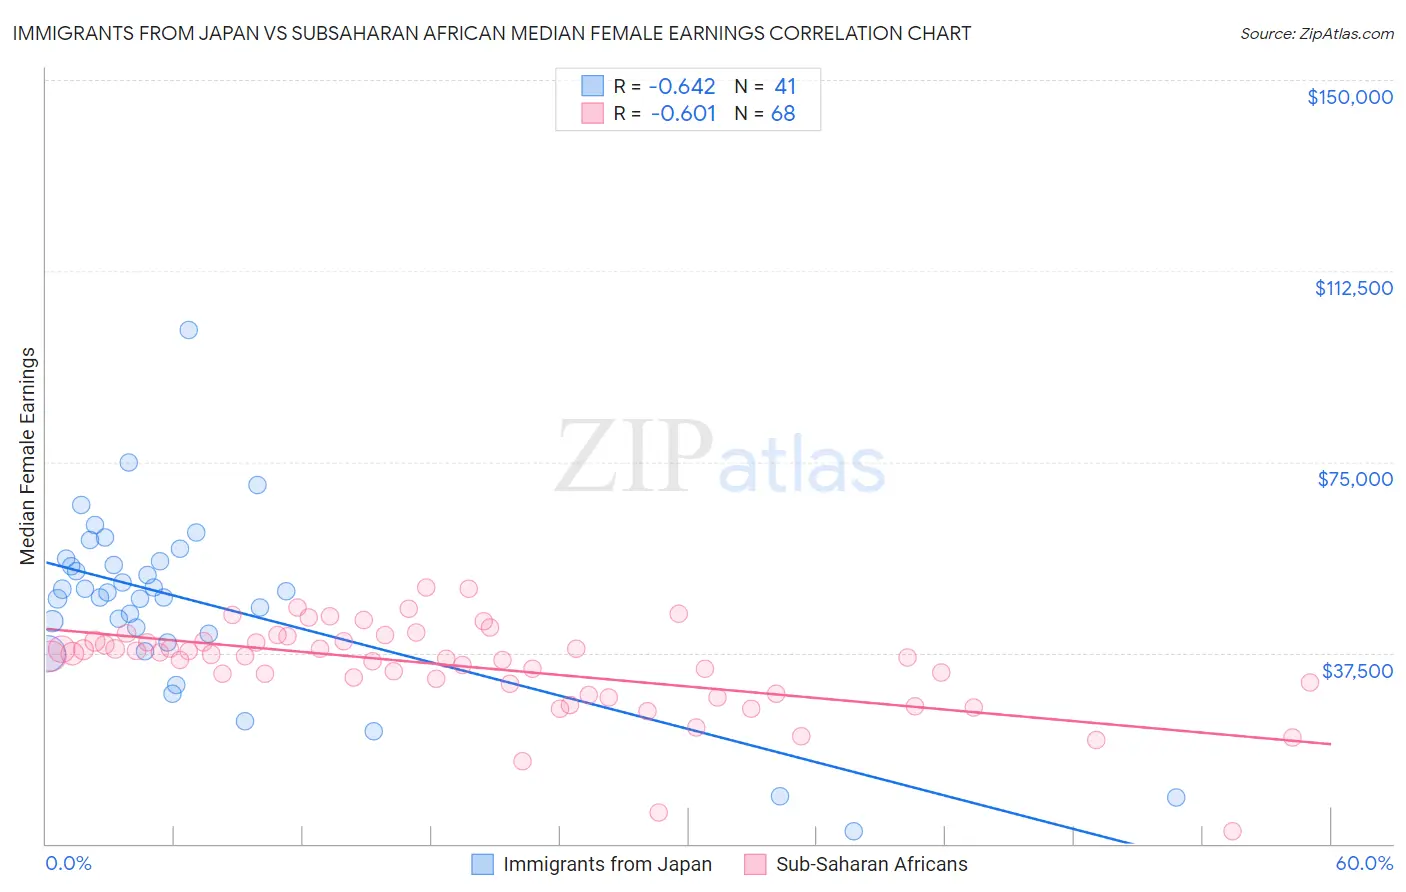 Immigrants from Japan vs Subsaharan African Median Female Earnings